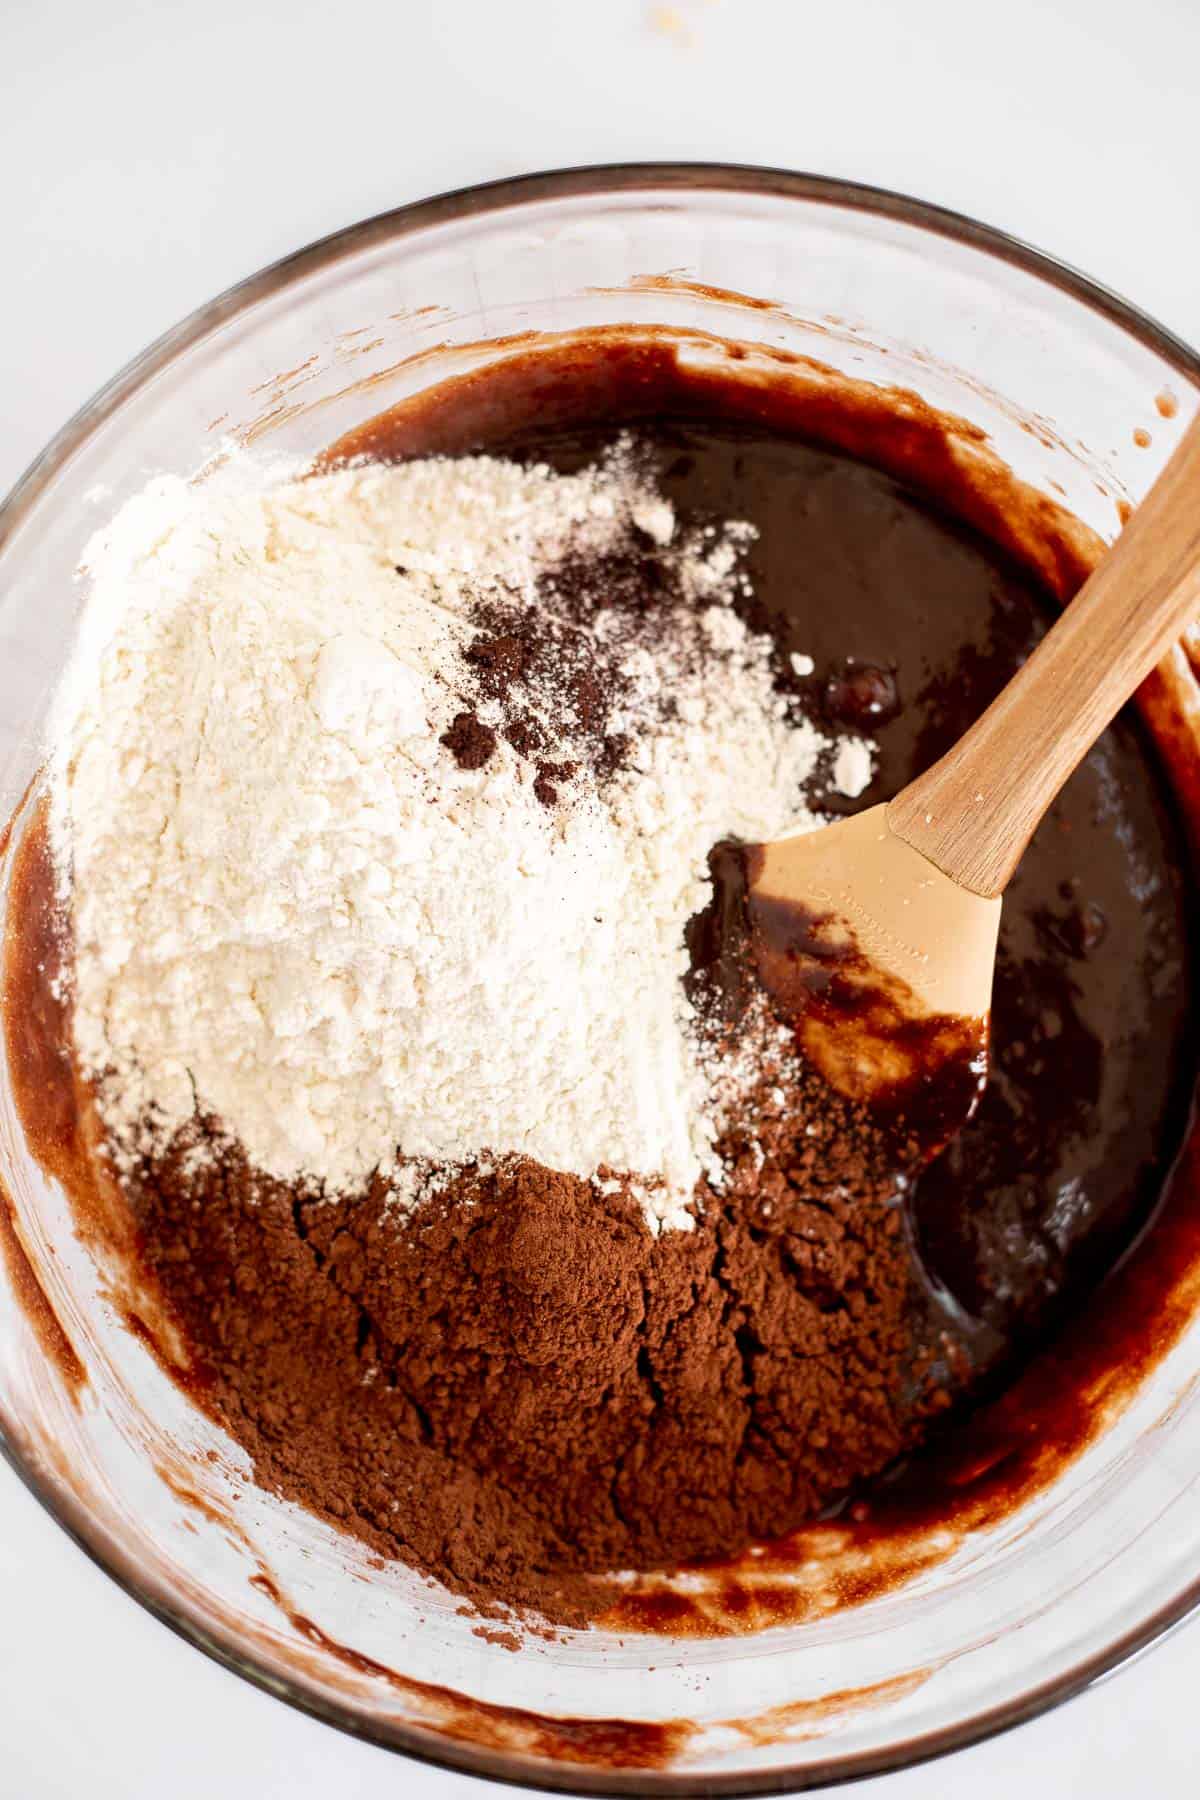 flour and cocoa mixing into melted chocolate mixture for brownies.